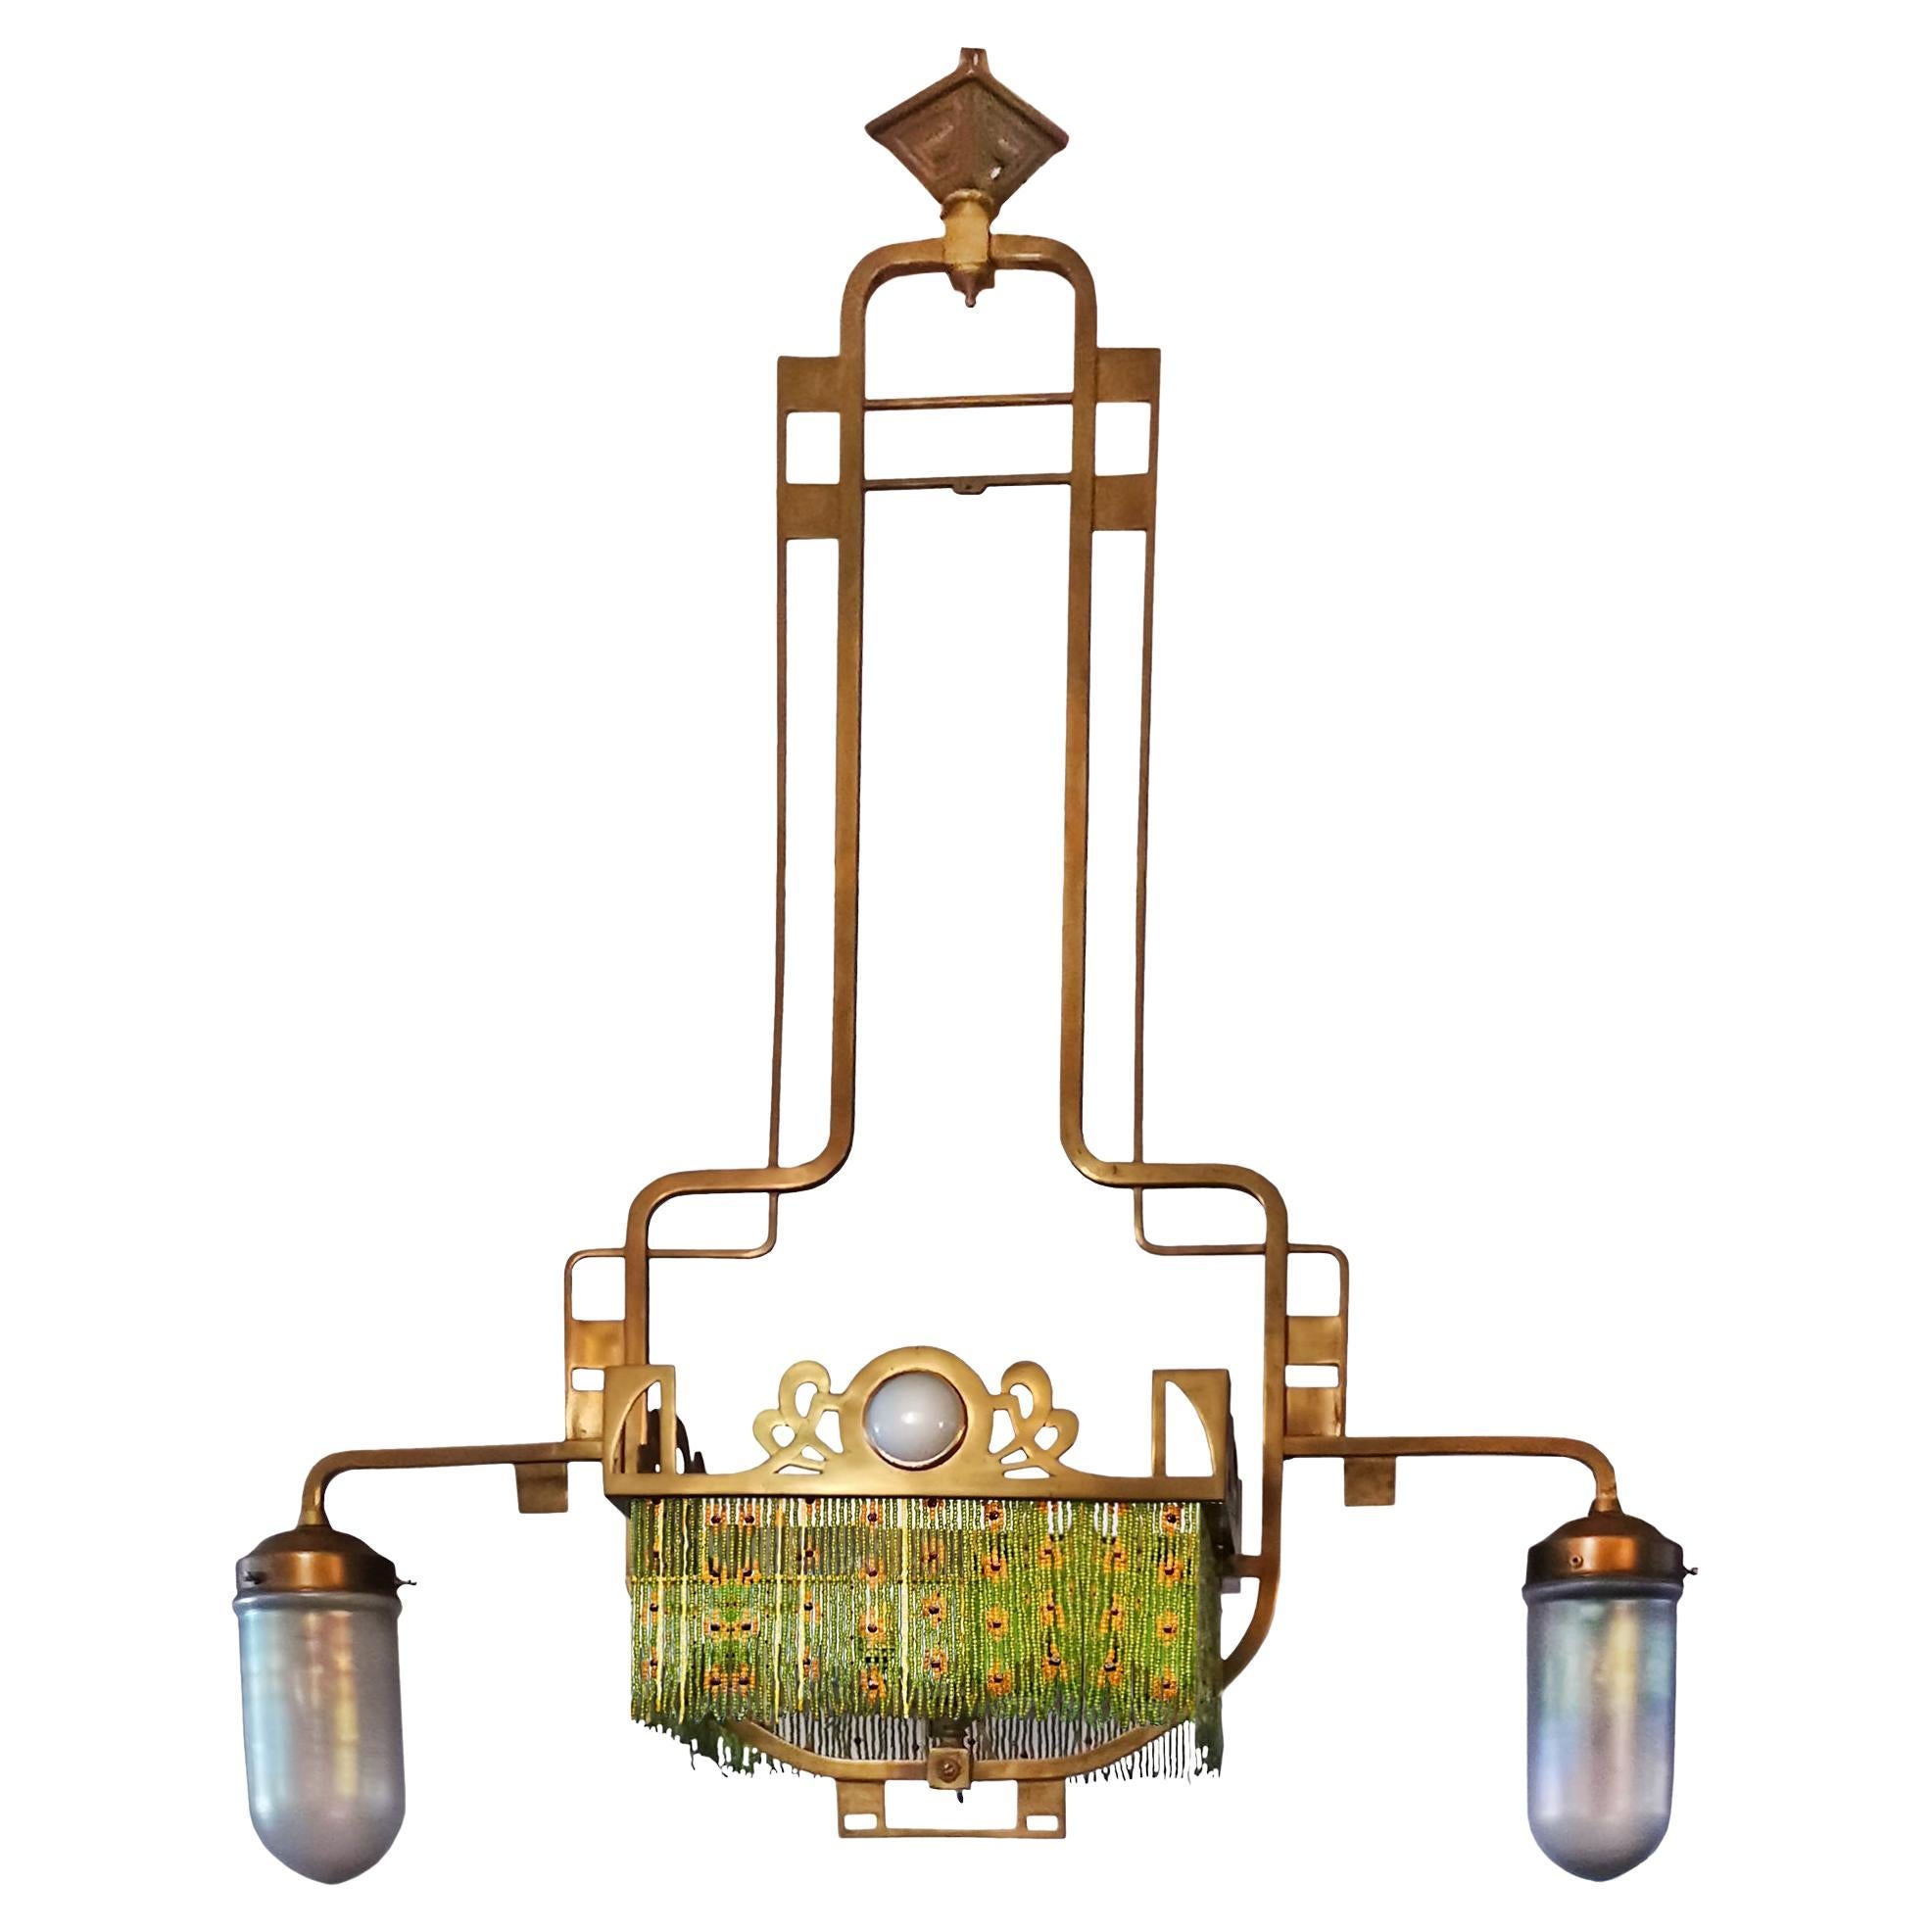 Art Nouveau Chandelier In Brass With Glass Tulips And Beads - Italy, 1900